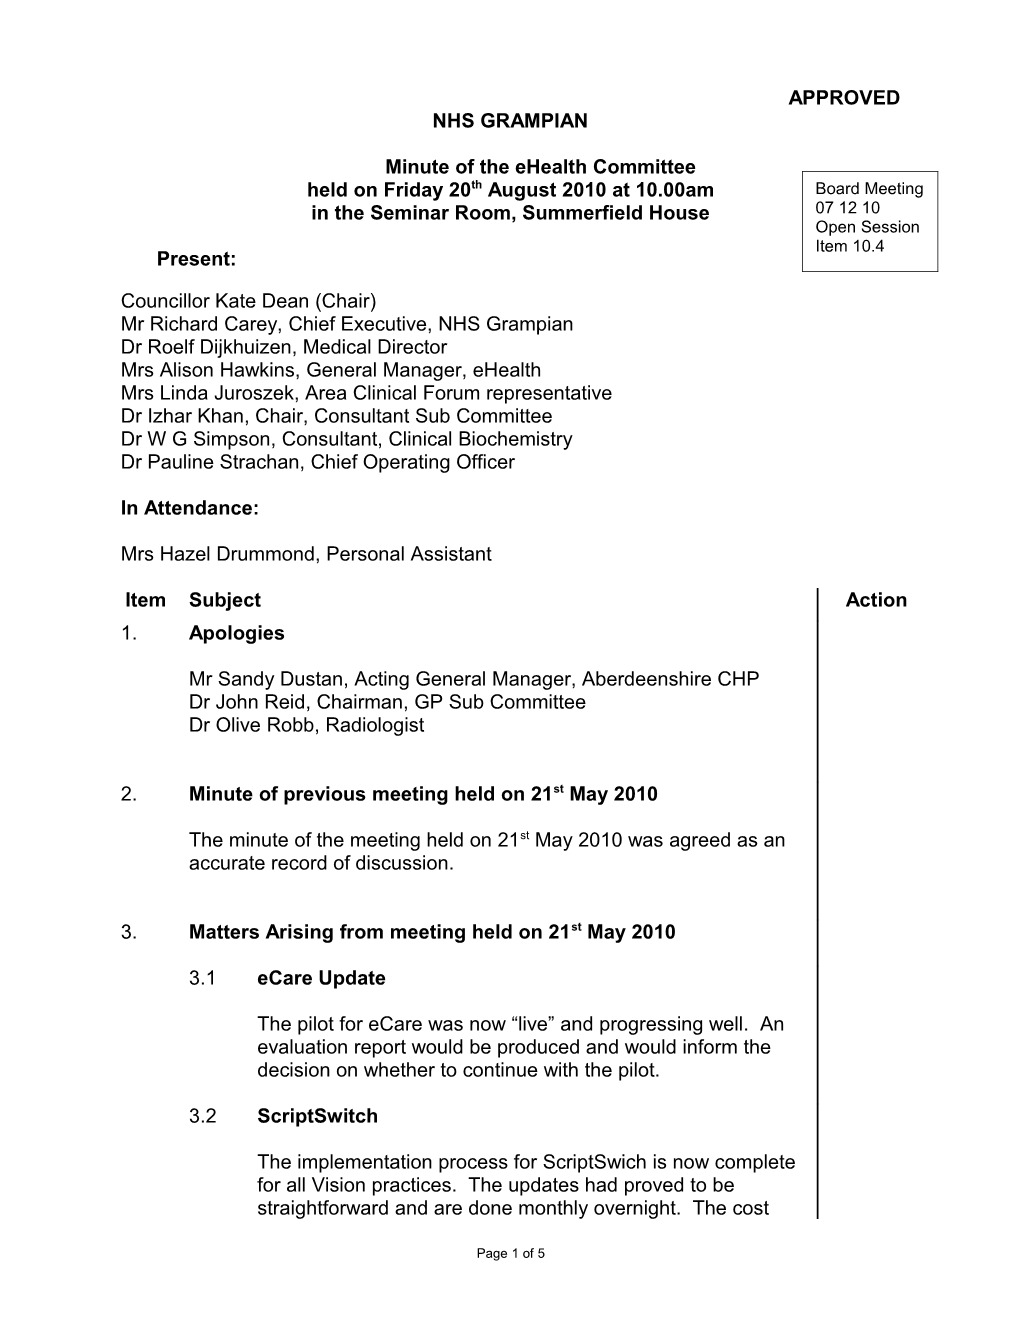 Item 10.4 for 7 Dec Ehealth Cttee 20 Aug